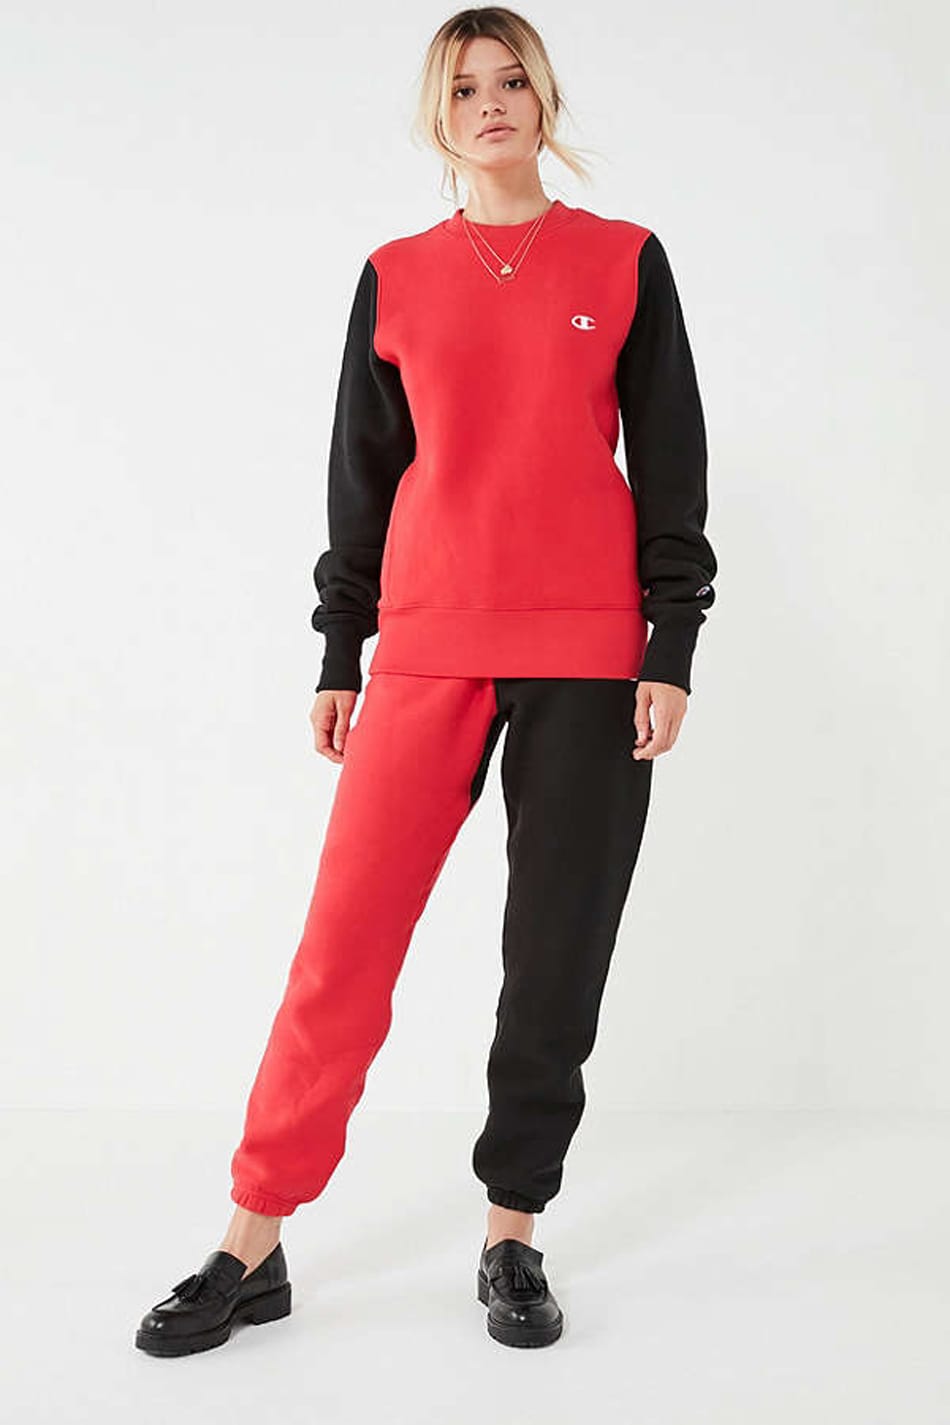 champion red and black sweatpants